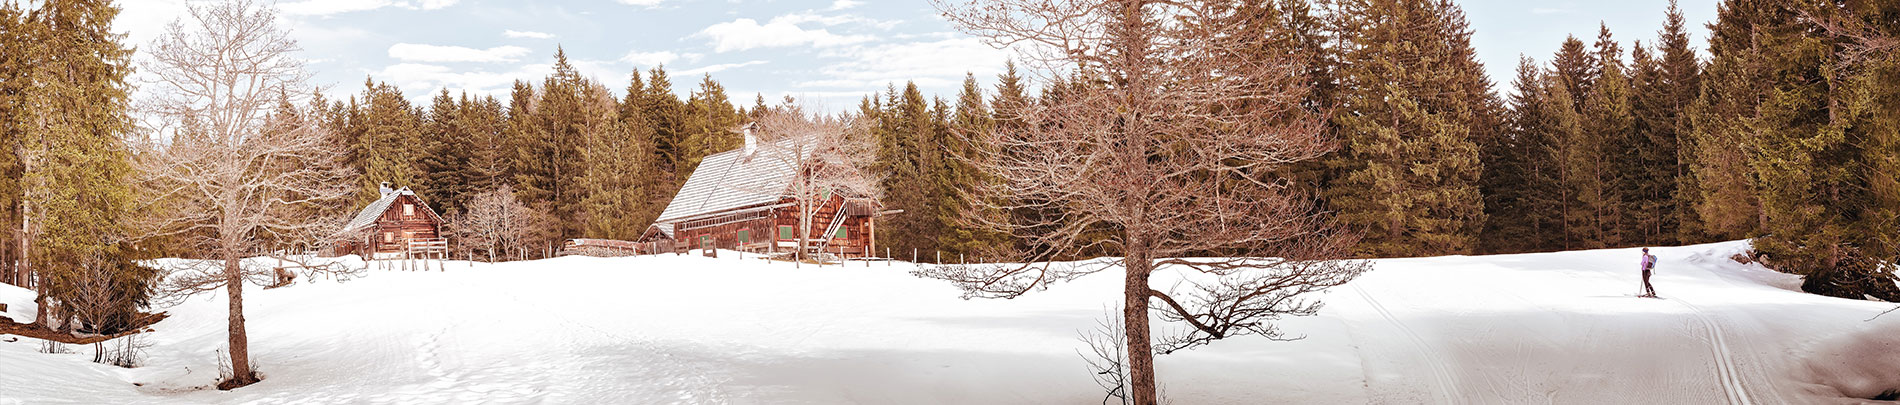 A cross country skier approaches a cabin in the woods.